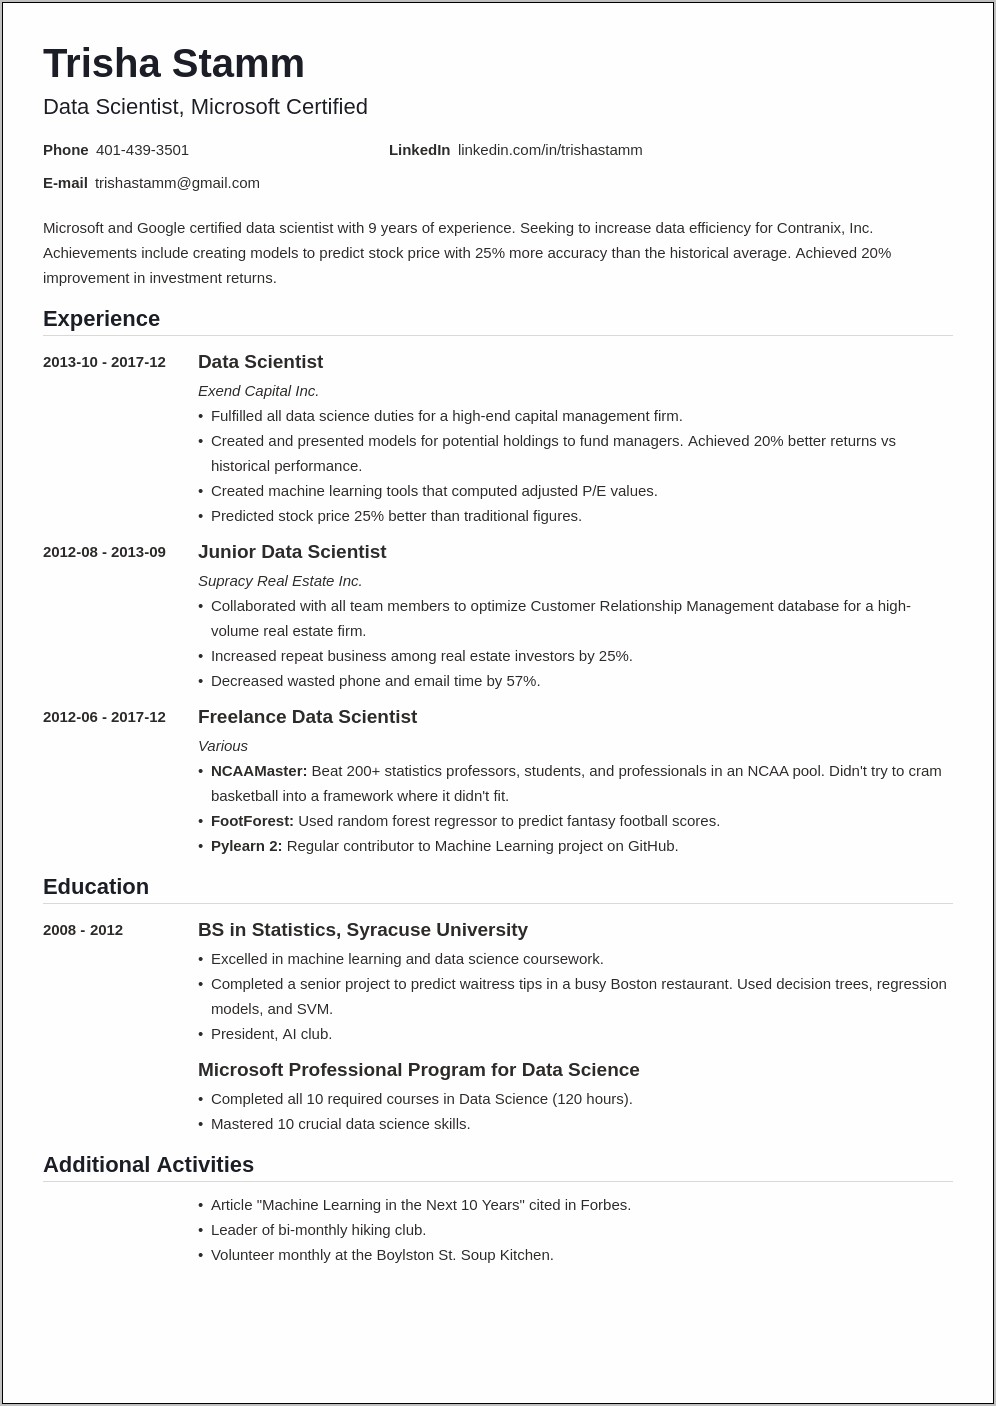 Resume Objective For Political Science Graduate